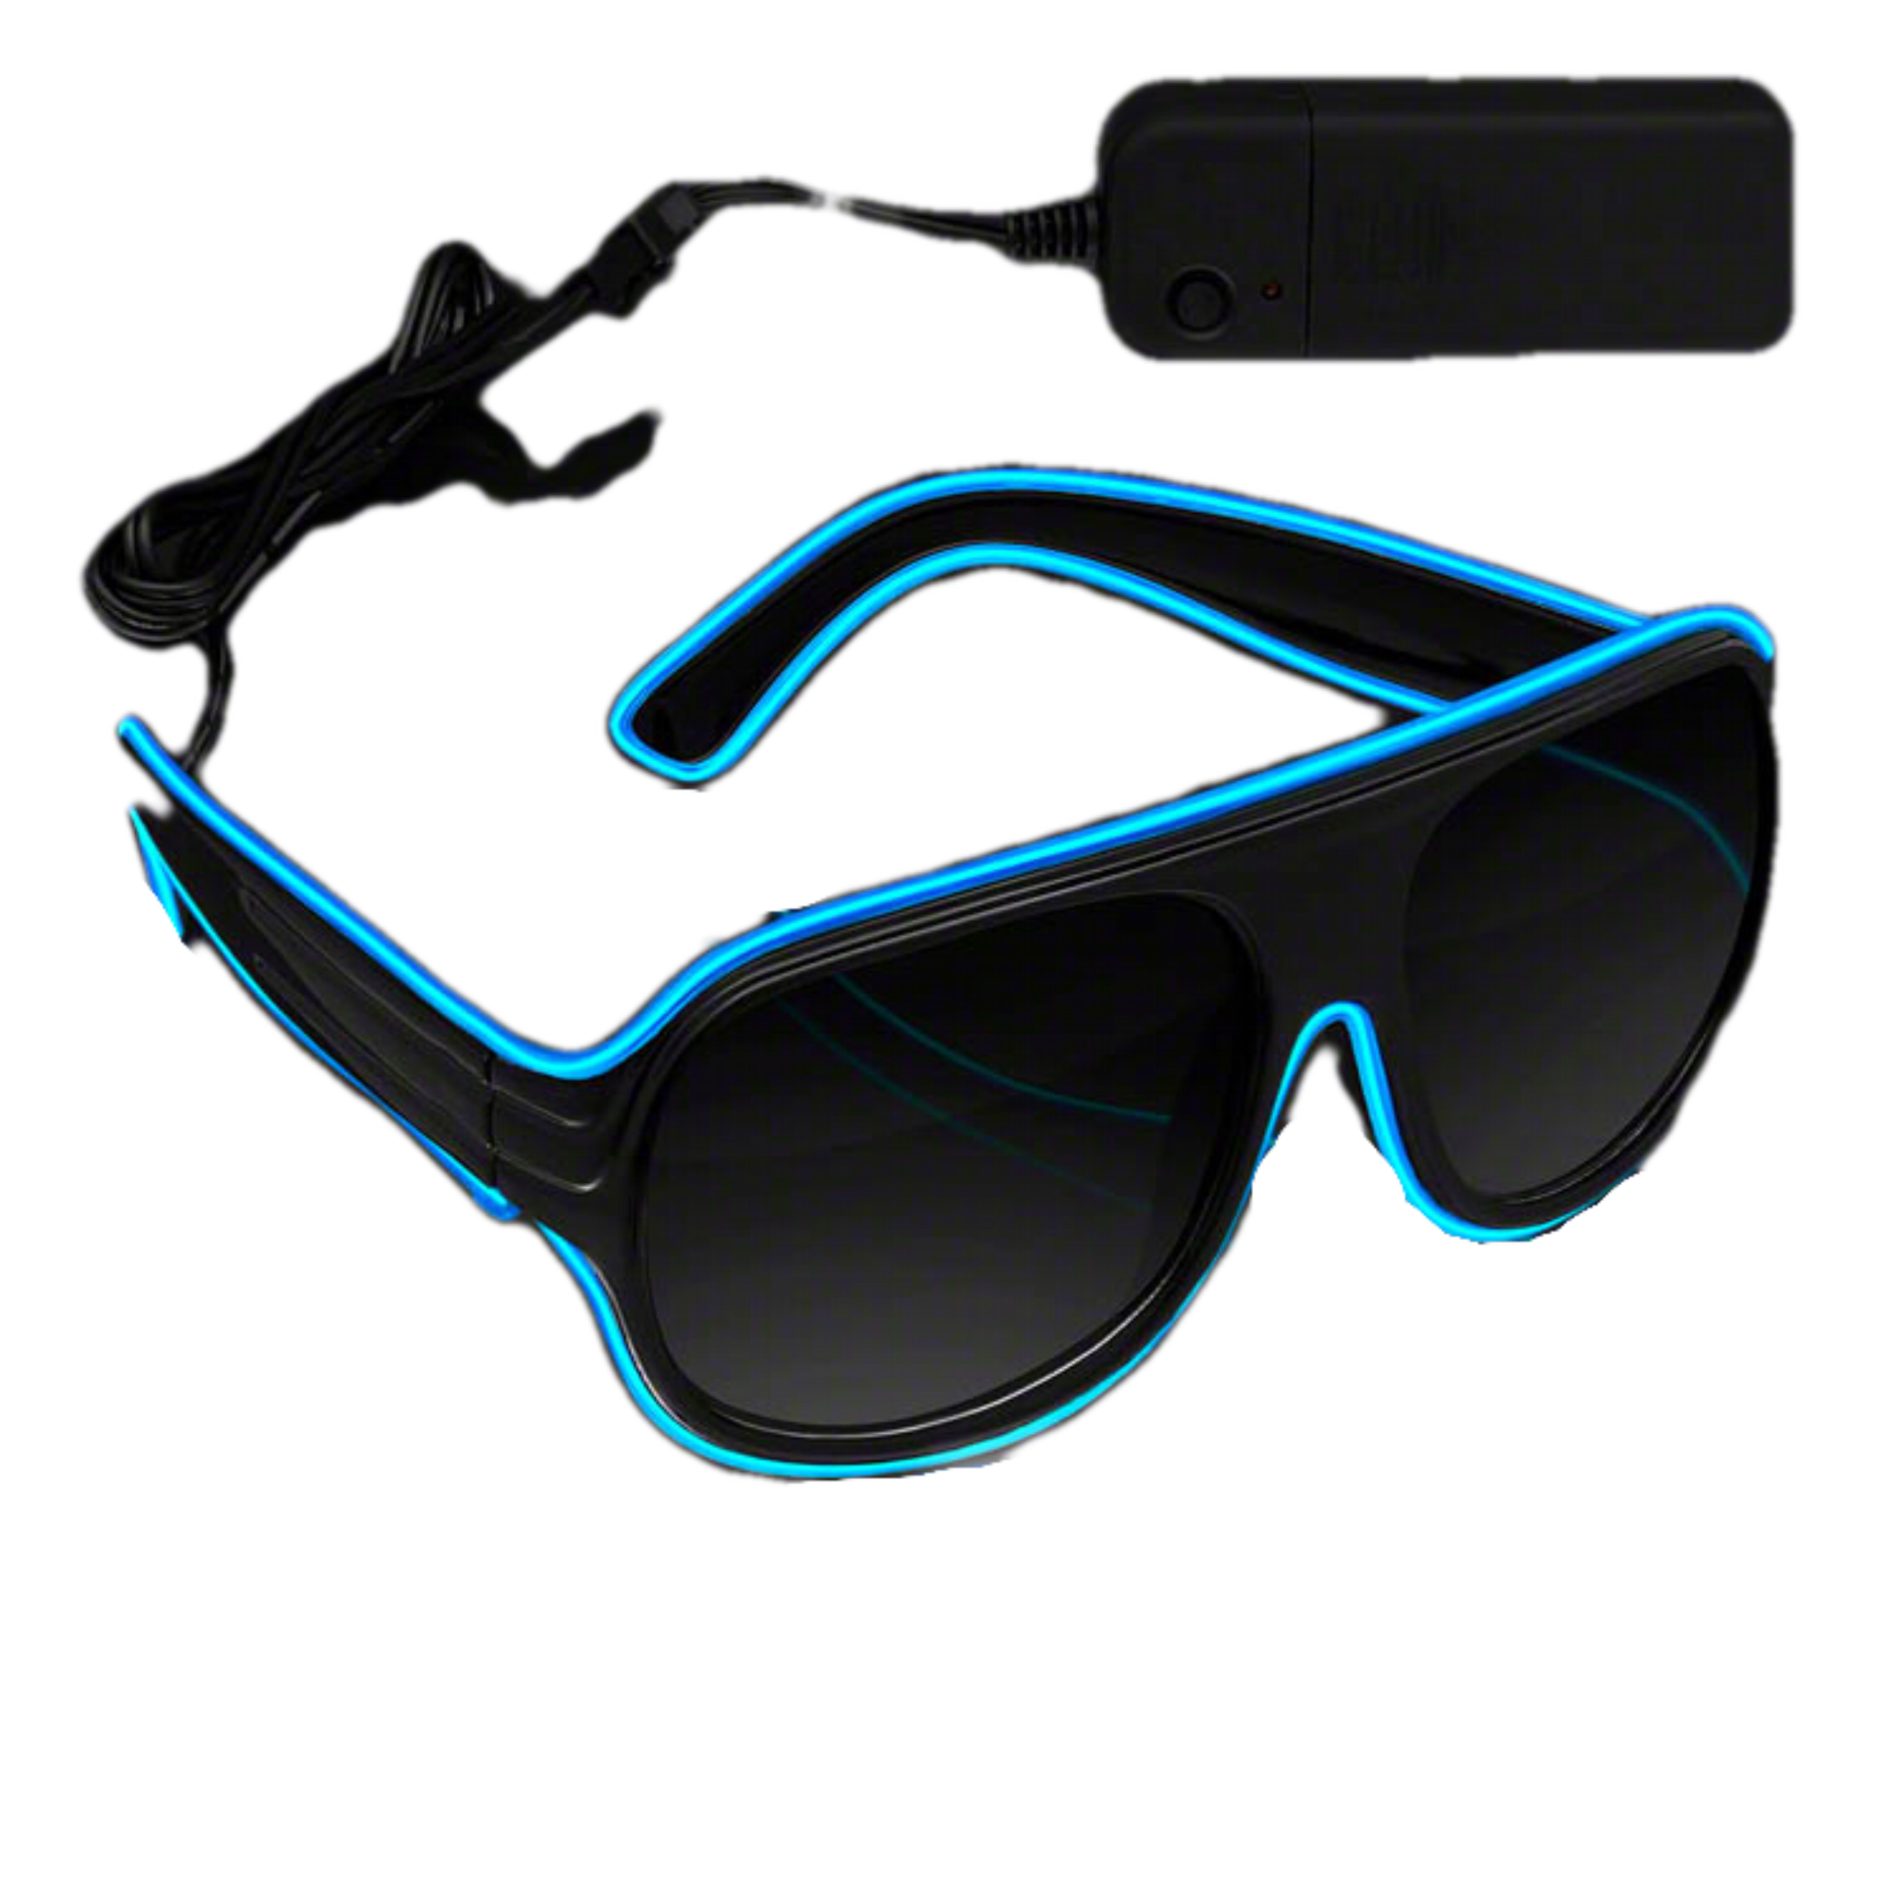 Electro Luminescent Banray Sunglasses Blue All Products 3